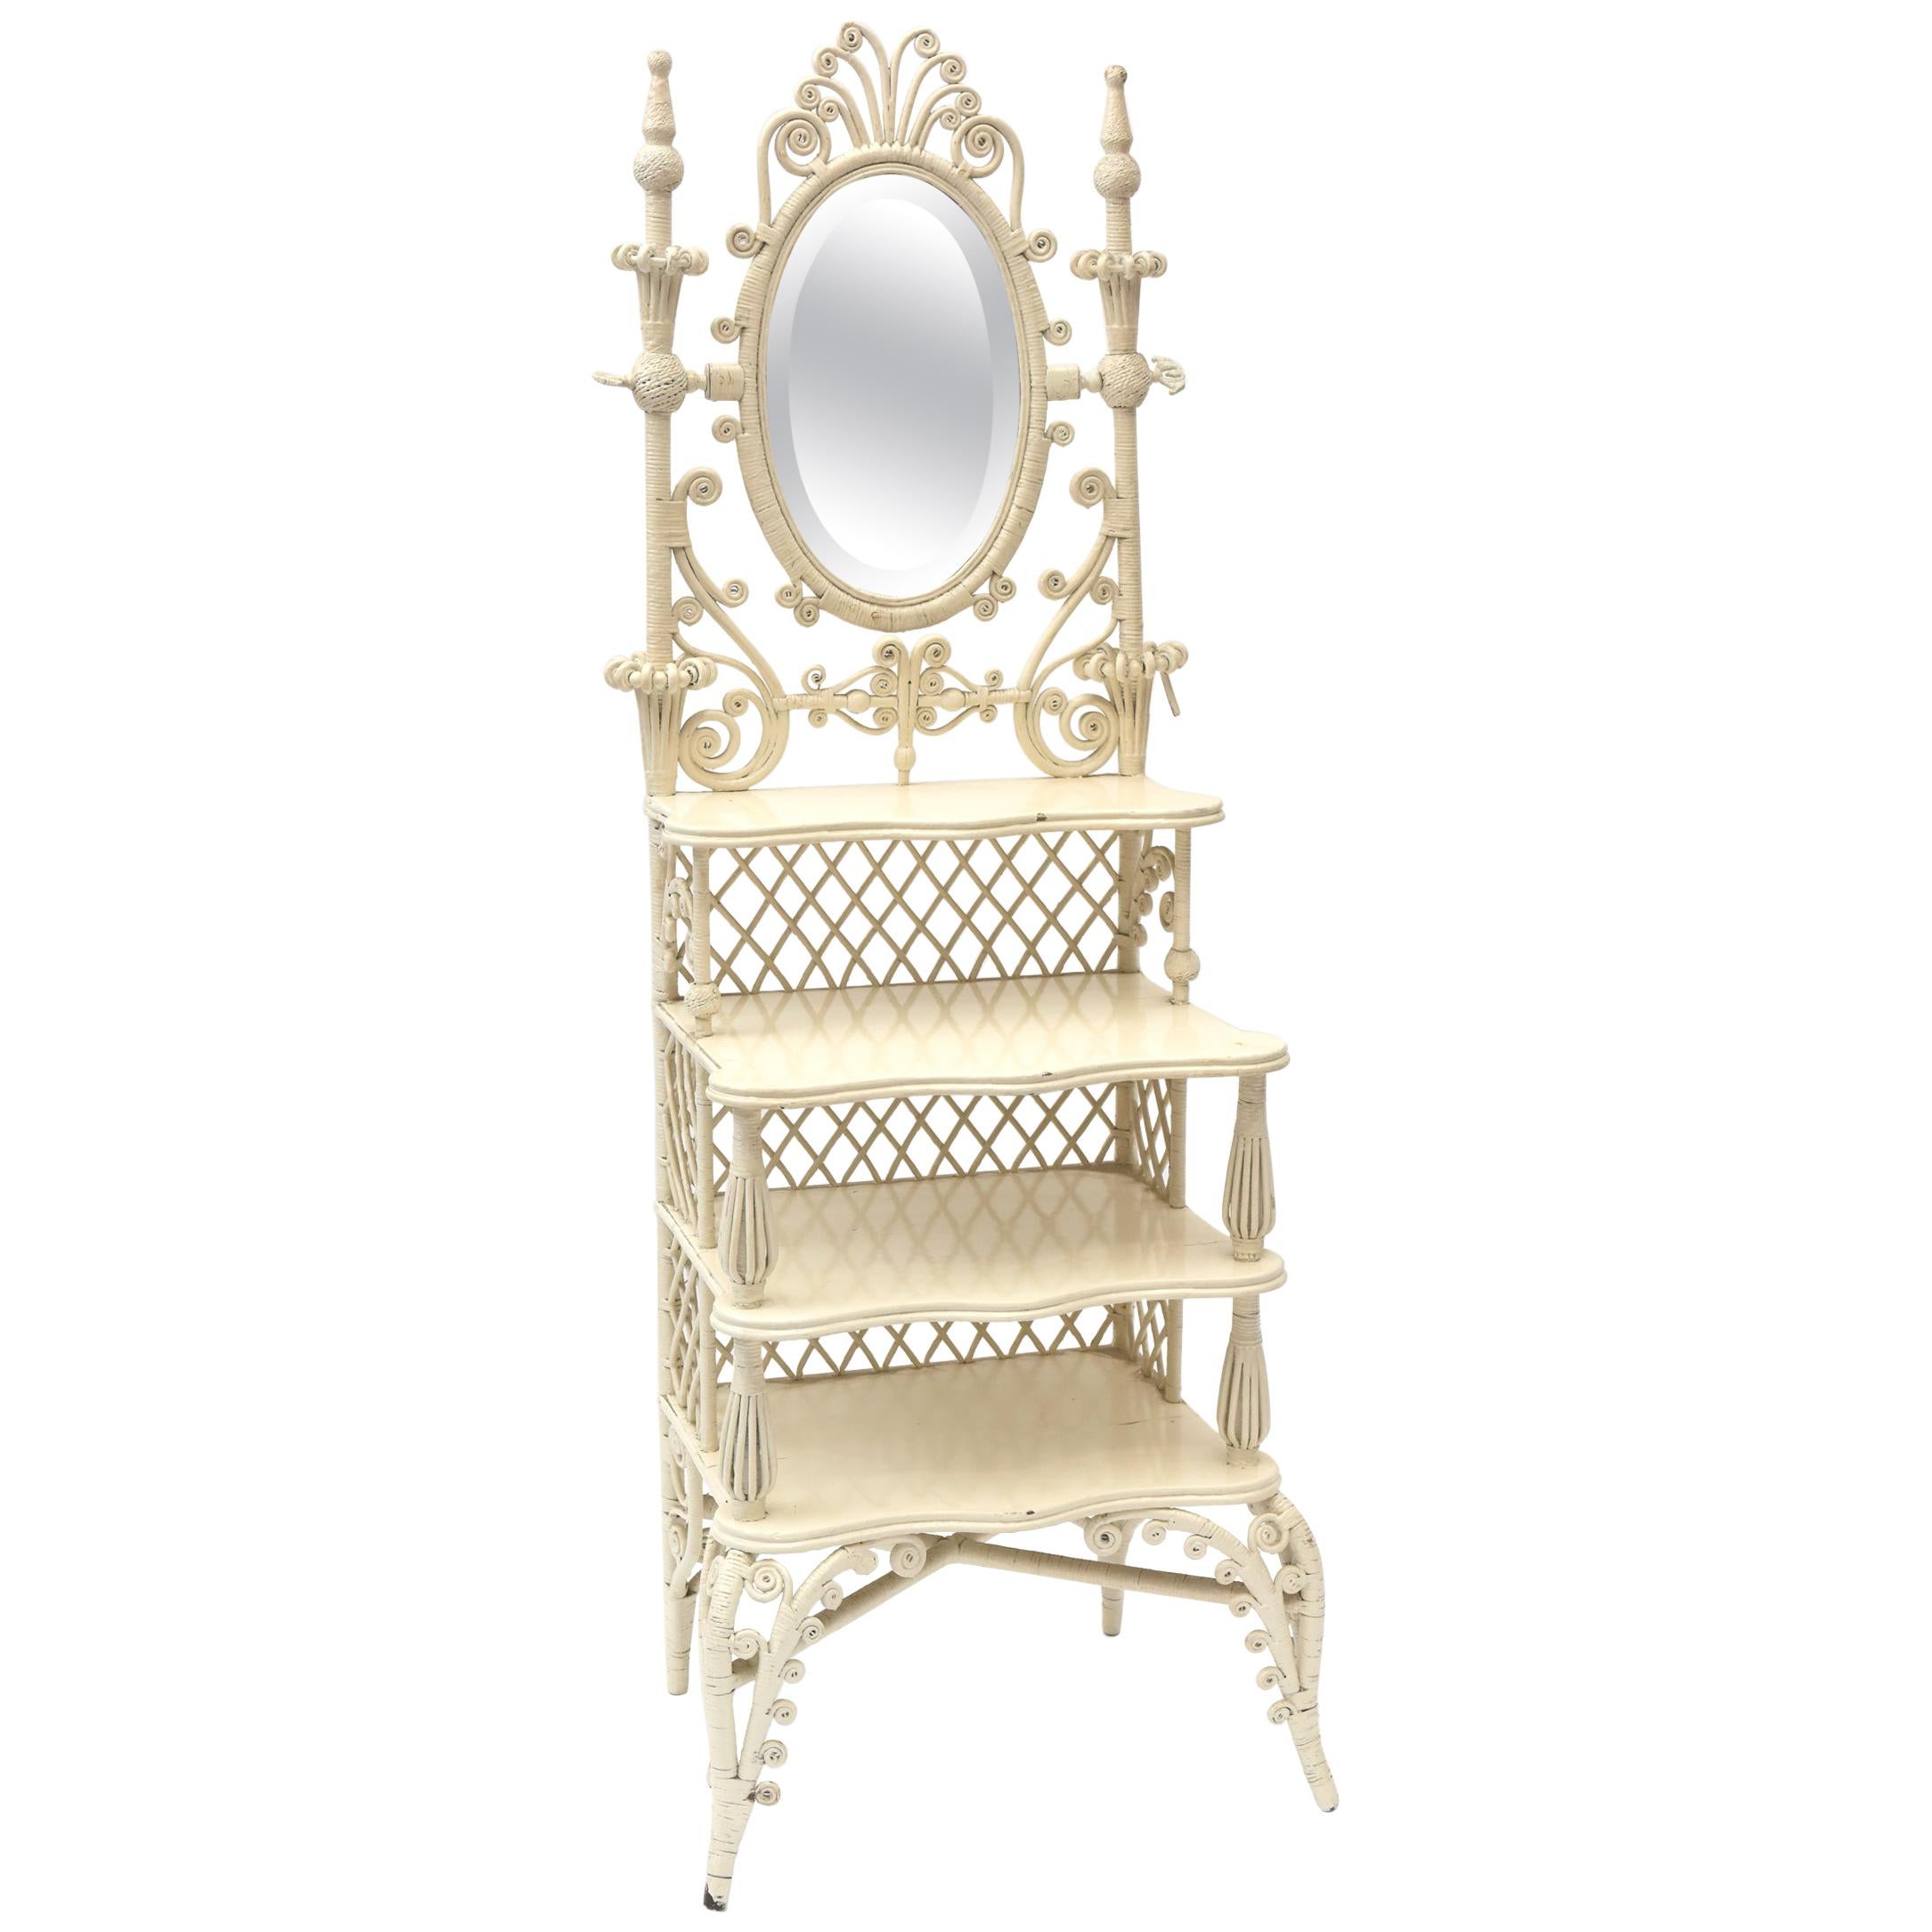 Victorian Wicker Mirrored Shaving or Vanity Stand with Shelves